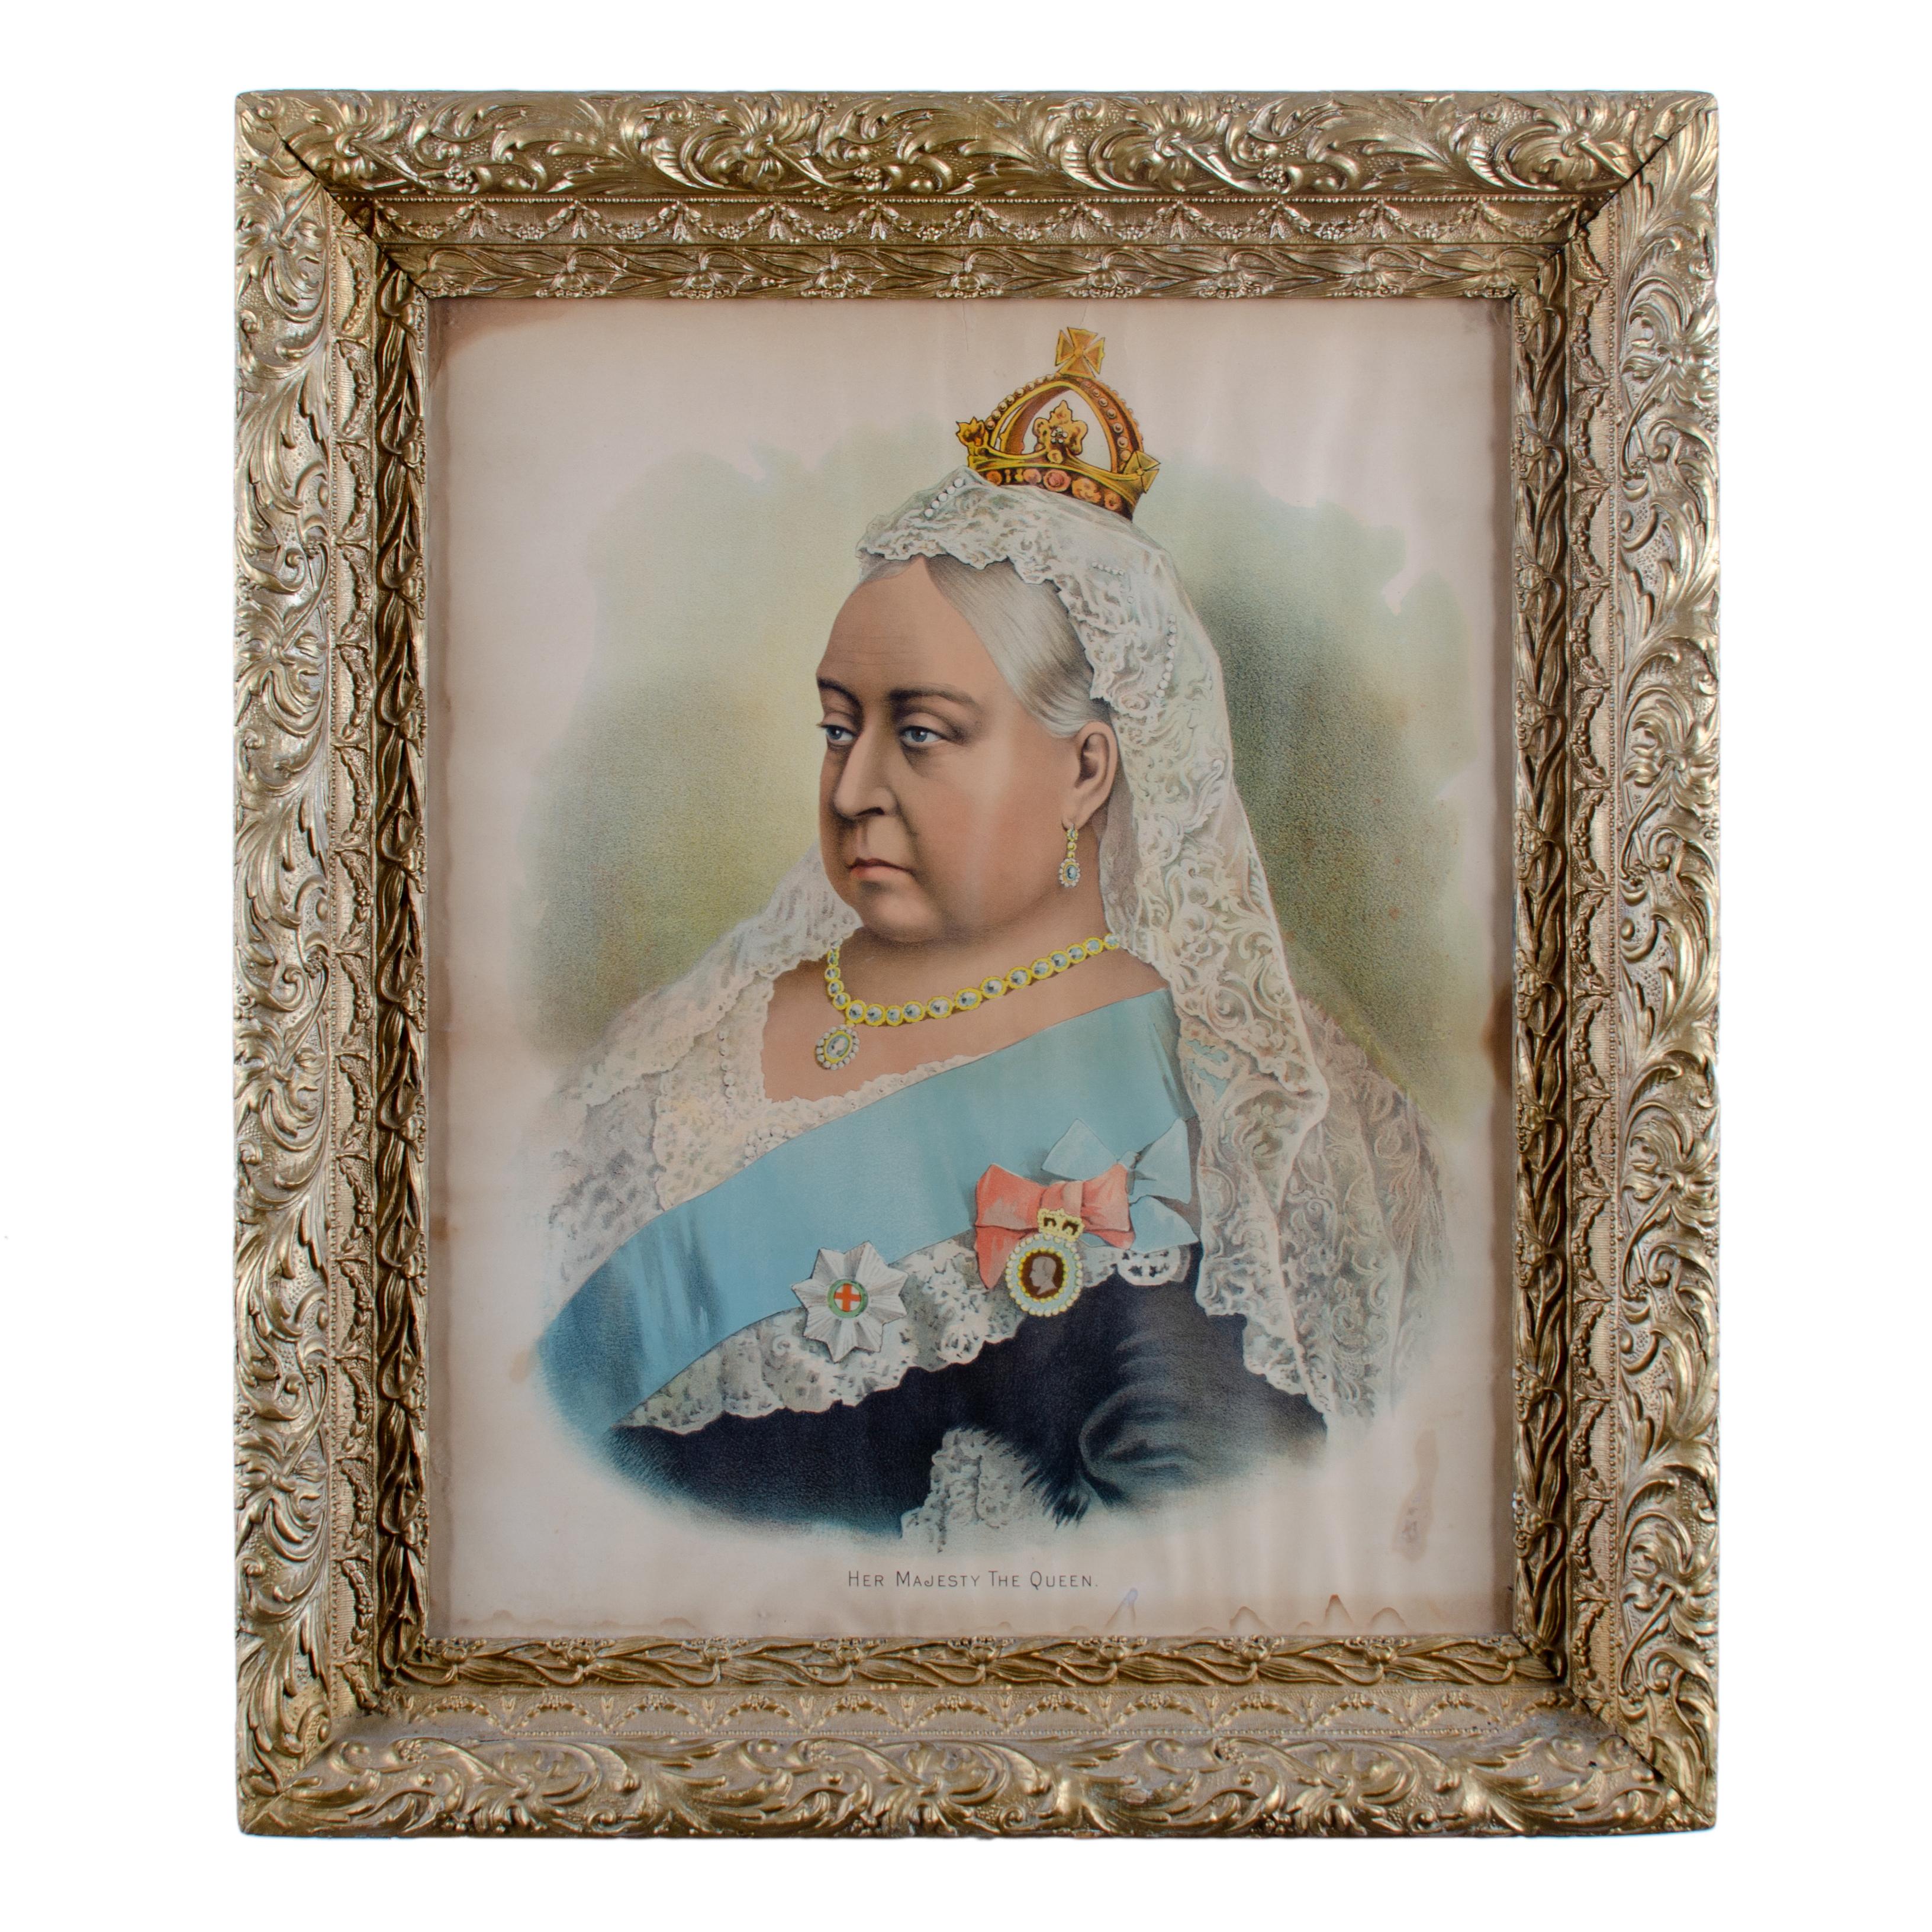 A rare lithograph of a portrait of Queen Victoria in her later years, entitled “Her Majesty the Queen